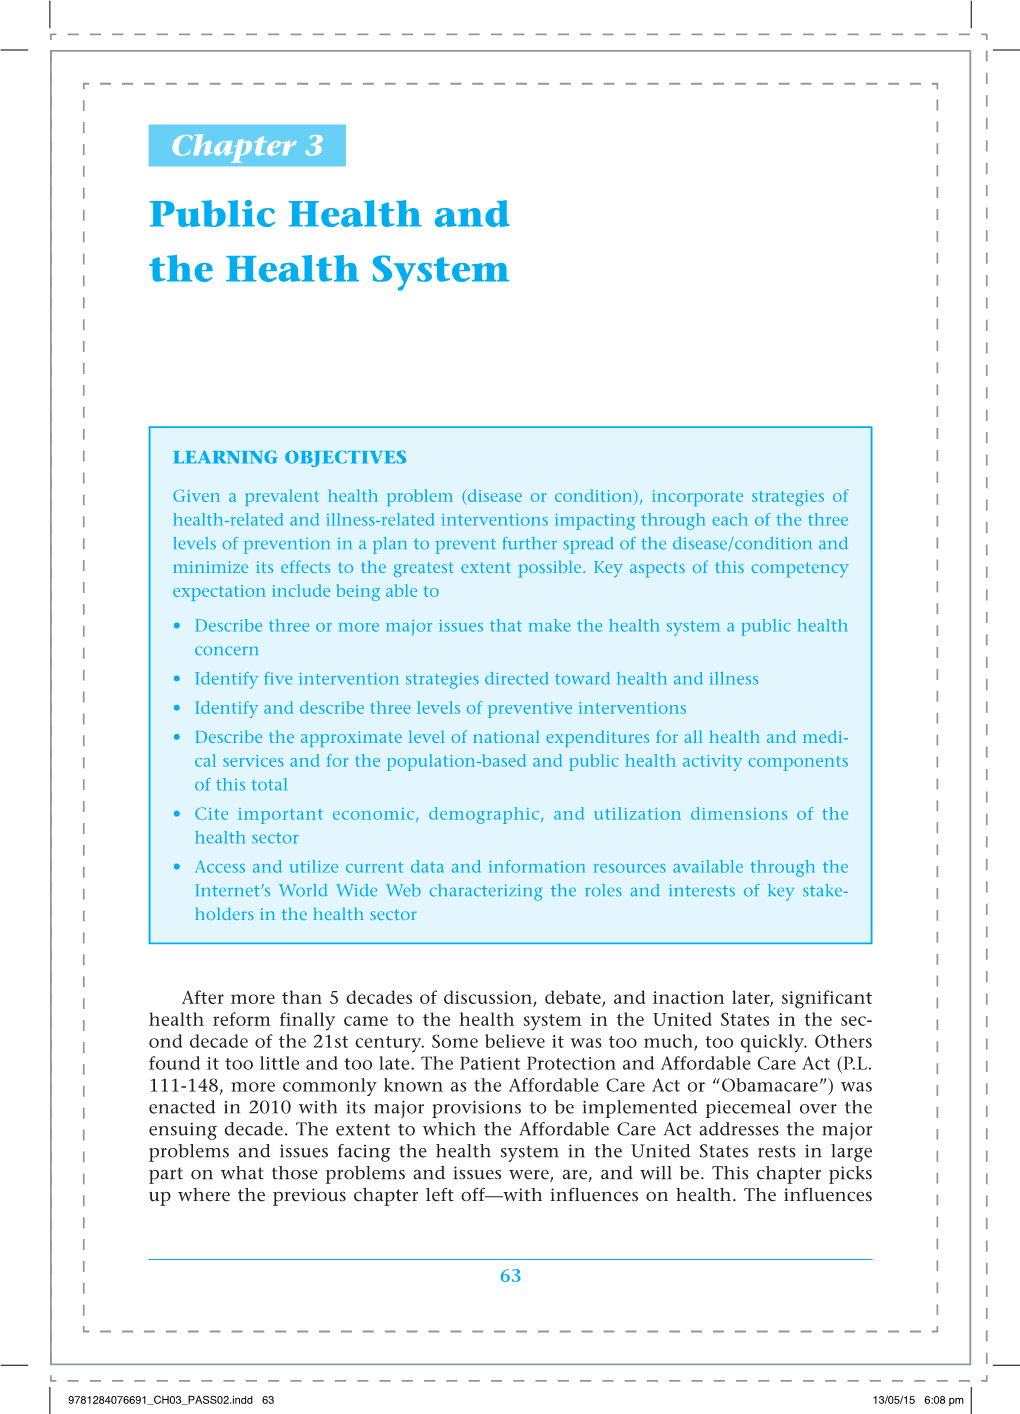 Public Health and the Health System